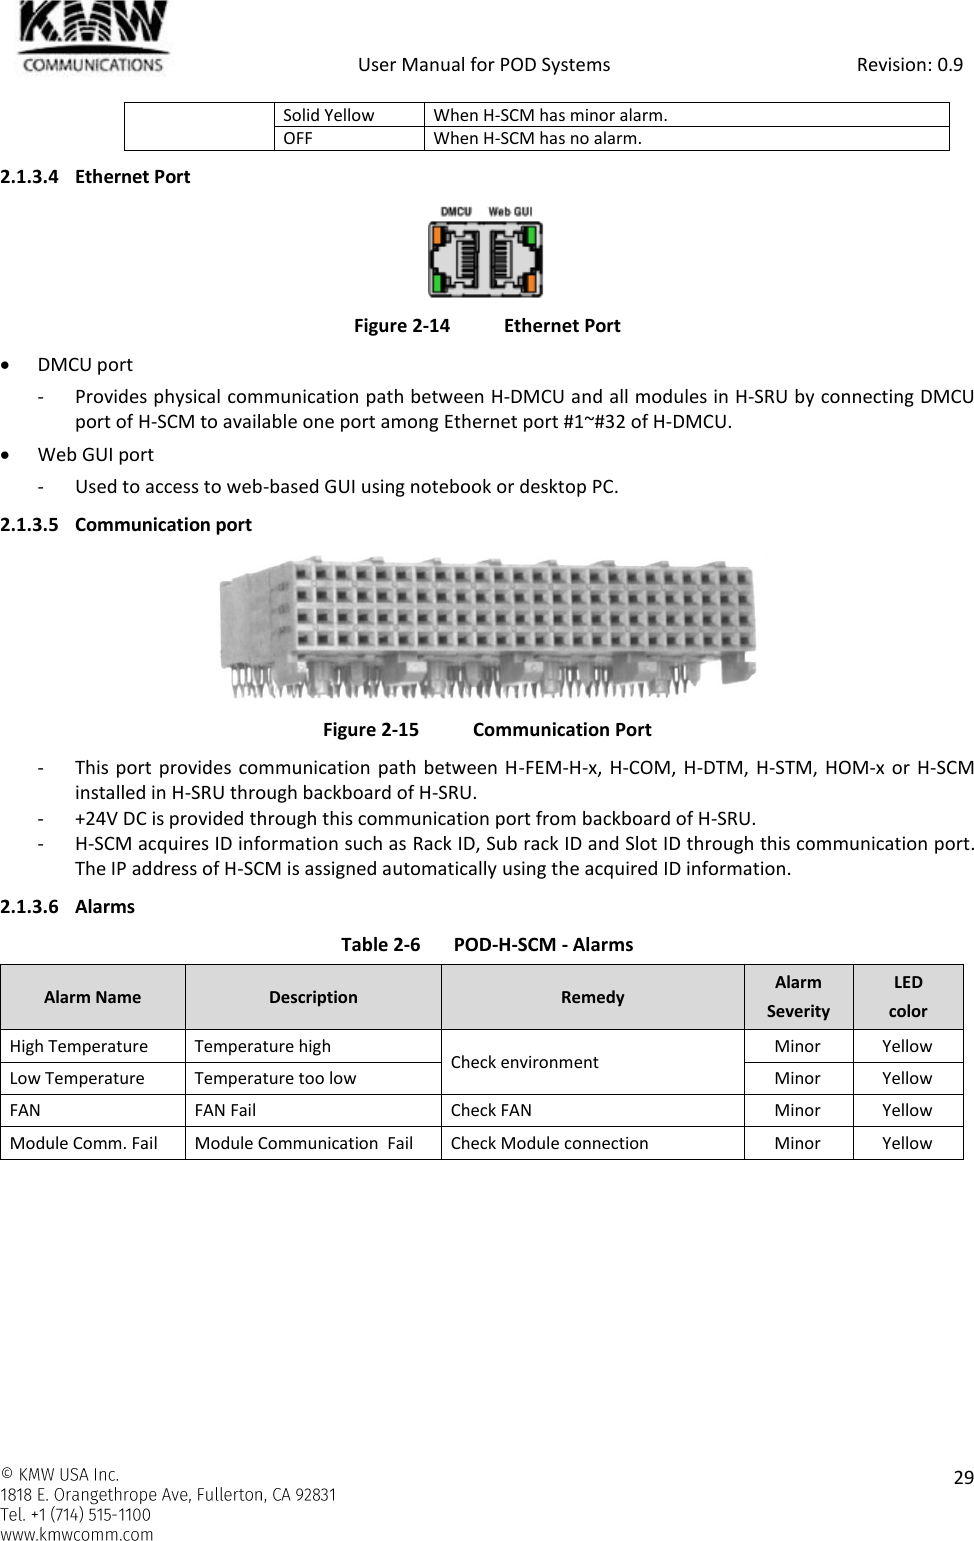            User Manual for POD Systems                                                     Revision: 0.9    29  Solid Yellow When H-SCM has minor alarm. OFF When H-SCM has no alarm. 2.1.3.4 Ethernet Port  Figure 2-14  Ethernet Port  DMCU port - Provides physical communication path between H-DMCU and all modules in H-SRU by connecting DMCU port of H-SCM to available one port among Ethernet port #1~#32 of H-DMCU.  Web GUI port - Used to access to web-based GUI using notebook or desktop PC. 2.1.3.5 Communication port  Figure 2-15  Communication Port - This port provides communication path between H-FEM-H-x,  H-COM, H-DTM,  H-STM, HOM-x or H-SCM installed in H-SRU through backboard of H-SRU. - +24V DC is provided through this communication port from backboard of H-SRU. - H-SCM acquires ID information such as Rack ID, Sub rack ID and Slot ID through this communication port. The IP address of H-SCM is assigned automatically using the acquired ID information. 2.1.3.6 Alarms Table 2-6  POD-H-SCM - Alarms Alarm Name Description Remedy Alarm Severity LED color High Temperature Temperature high Check environment Minor Yellow Low Temperature Temperature too low Minor Yellow FAN FAN Fail Check FAN Minor Yellow Module Comm. Fail Module Communication  Fail Check Module connection Minor Yellow   